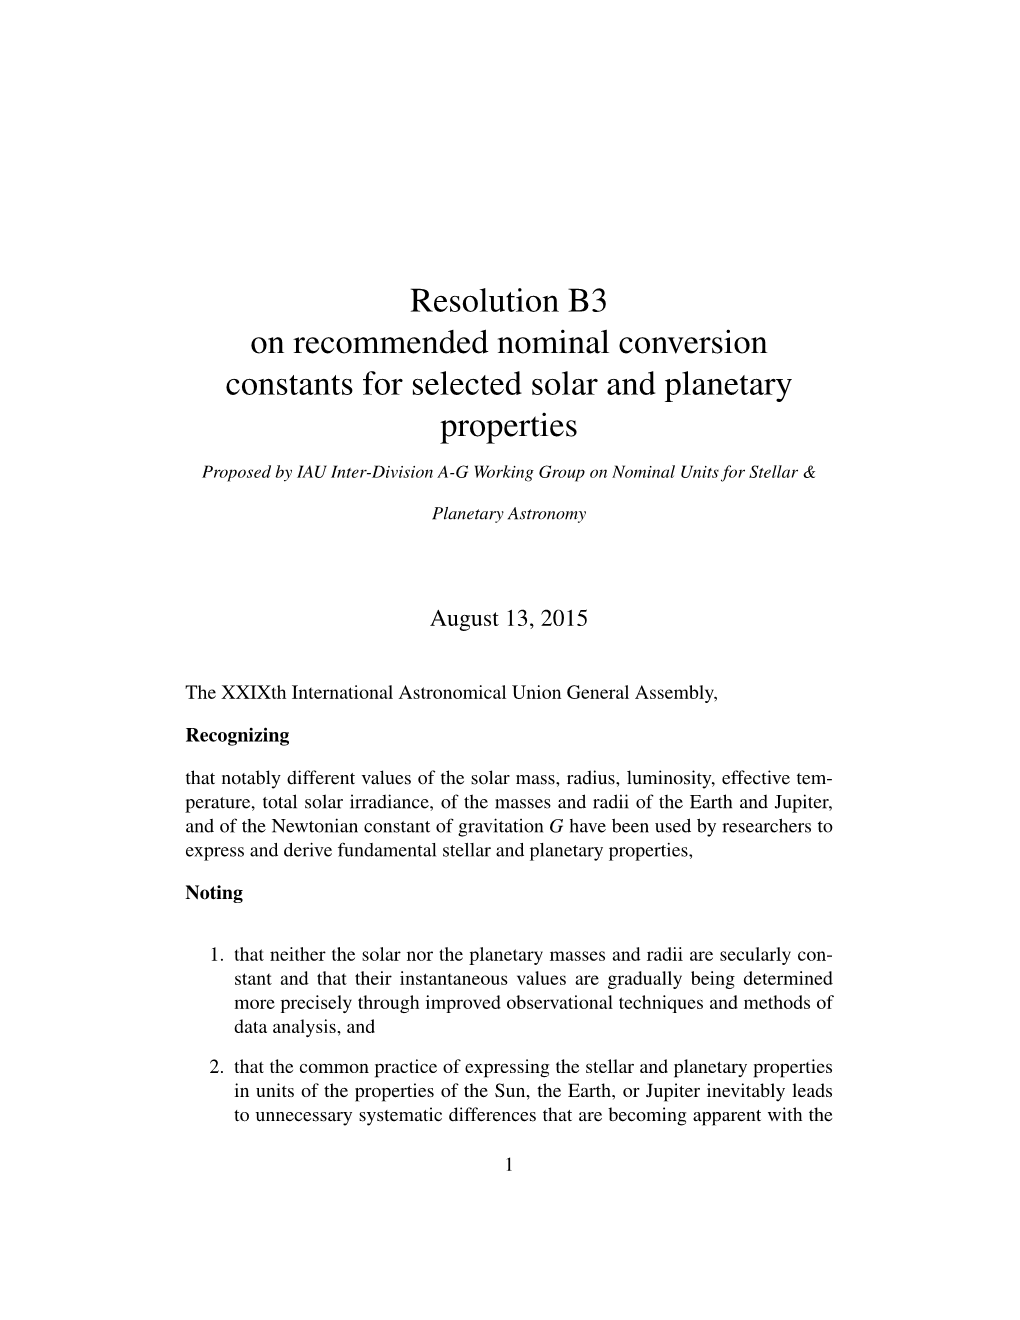 Resolution B3 on Recommended Nominal Conversion Constants for Selected Solar and Planetary Properties